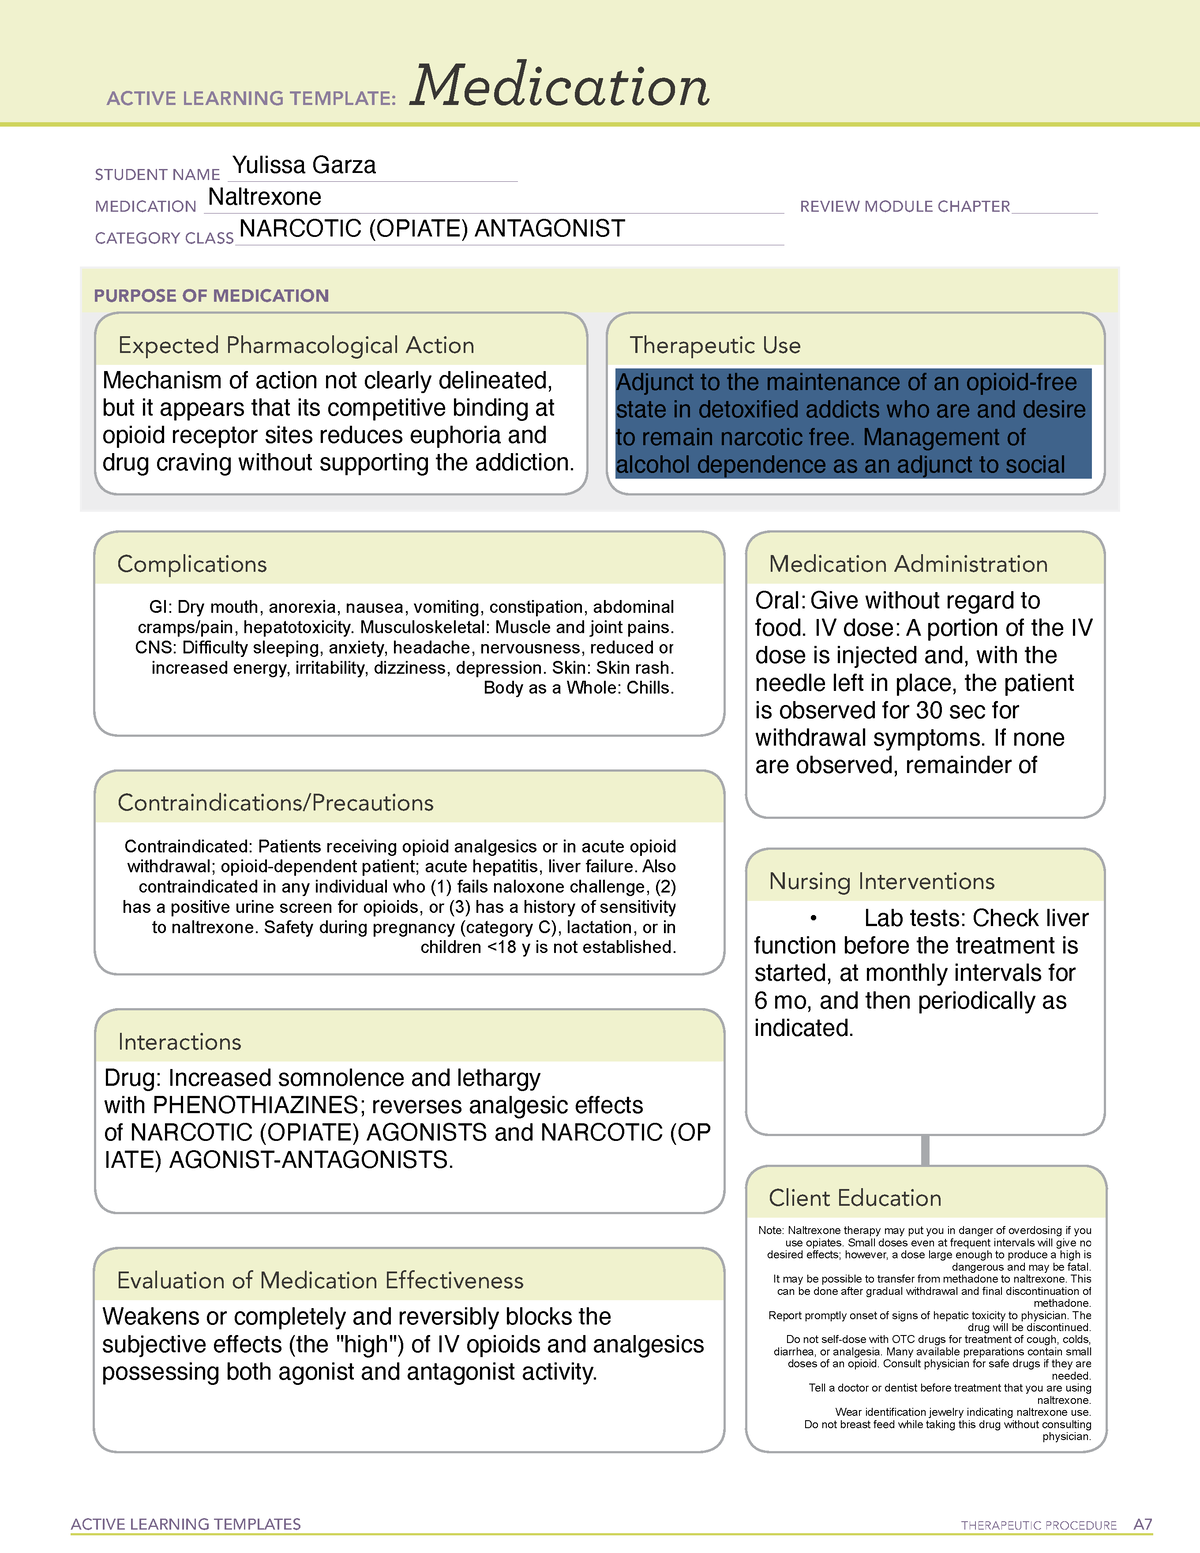 naltrexone-alt-active-learning-templates-therapeutic-procedure-a